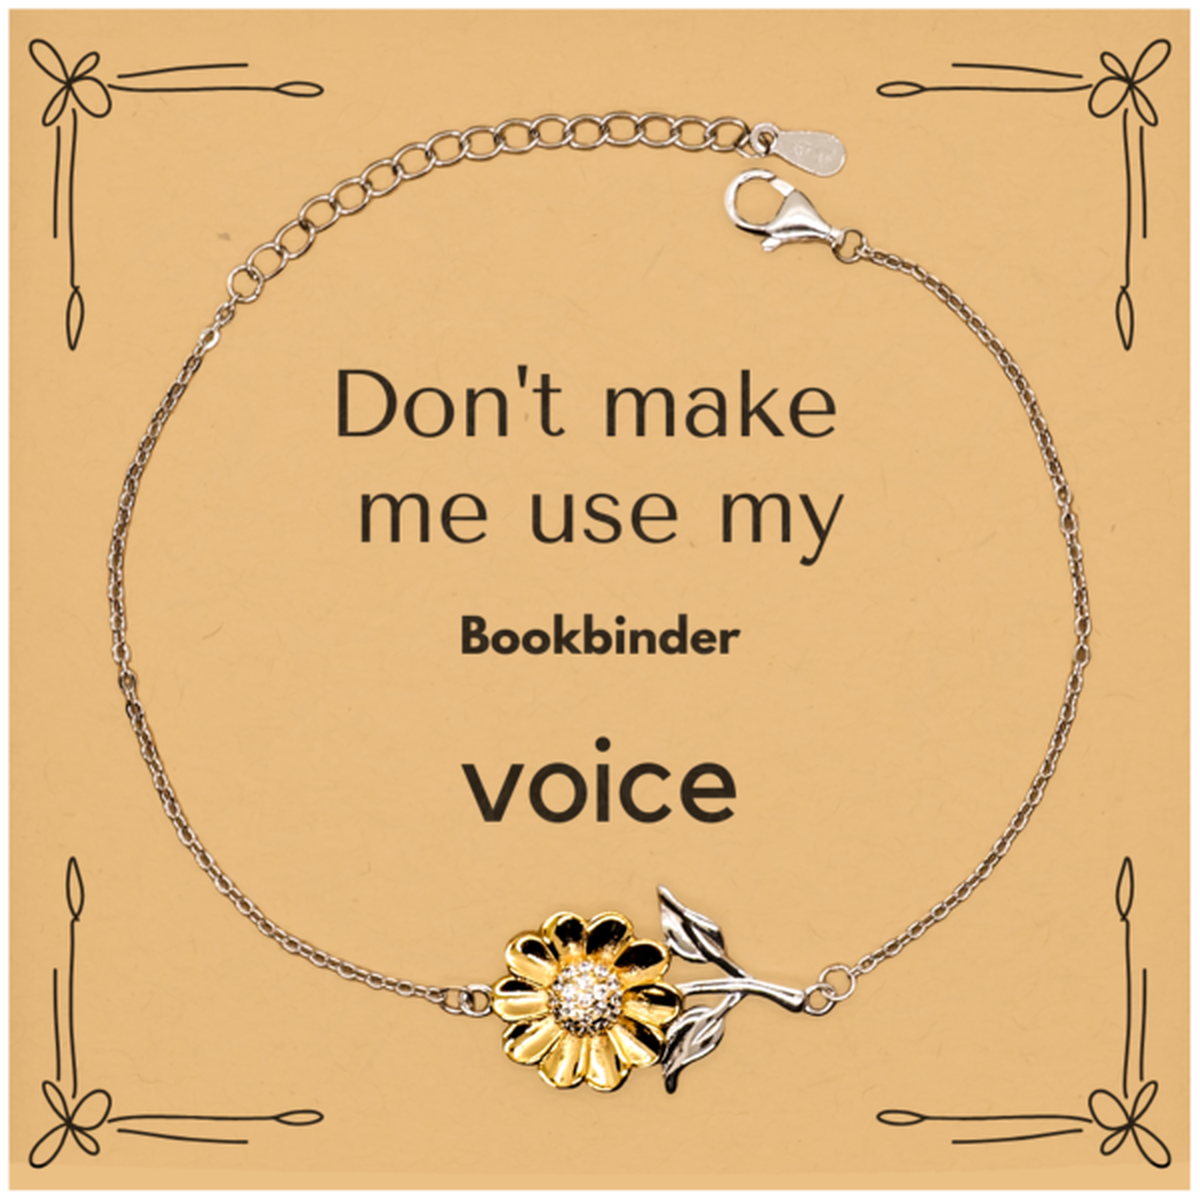 Don't make me use my Bookbinder voice, Sarcasm Bookbinder Card Gifts, Christmas Bookbinder Sunflower Bracelet Birthday Unique Gifts For Bookbinder Coworkers, Men, Women, Colleague, Friends